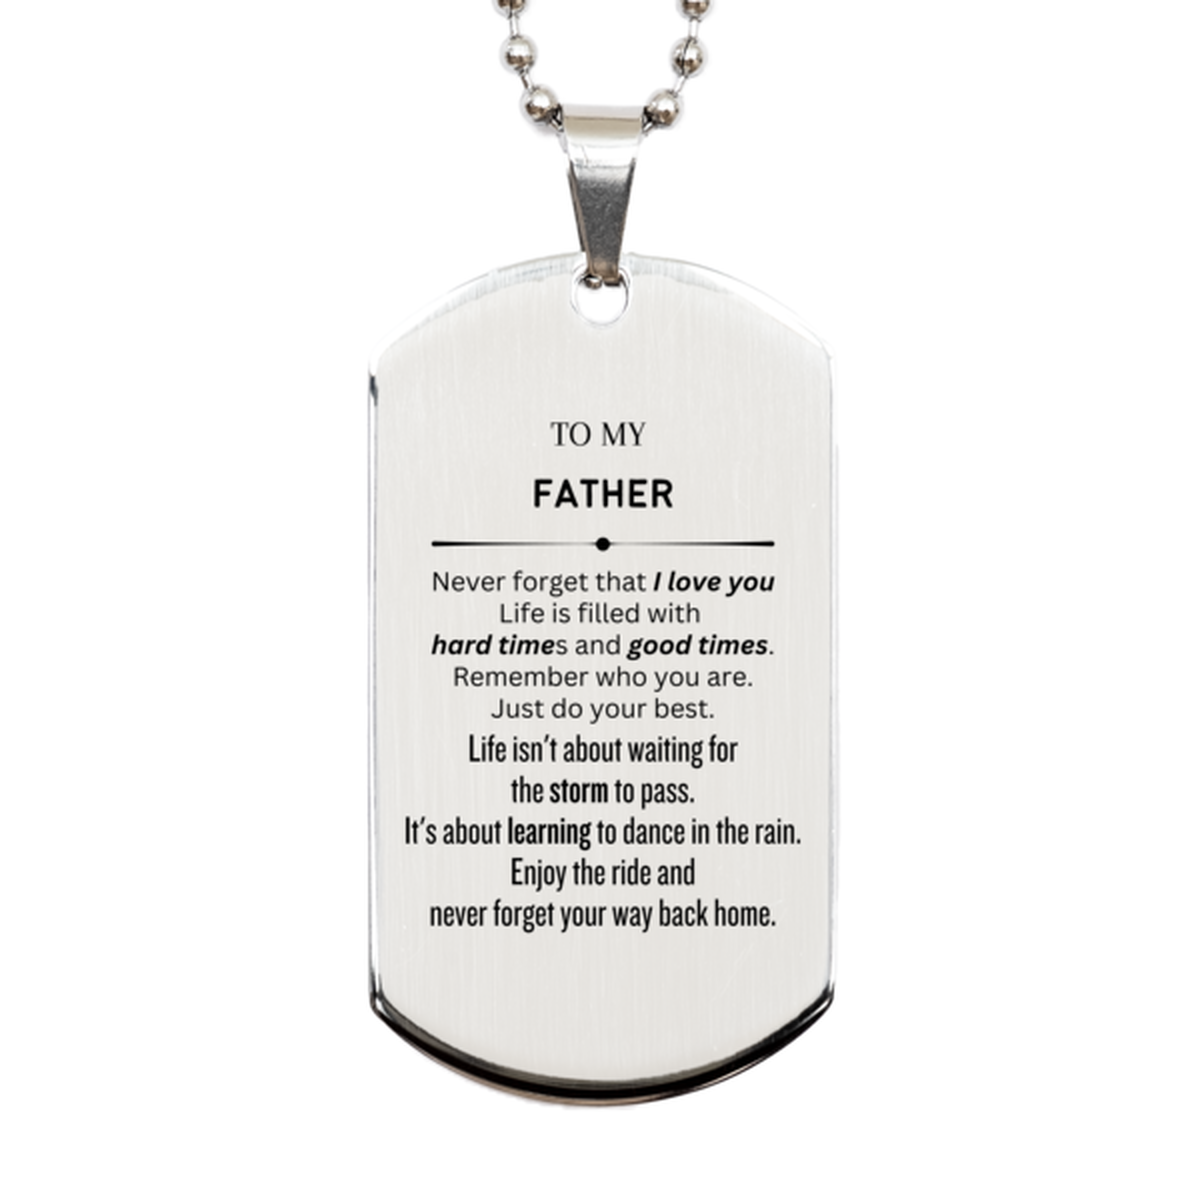 Christmas Father Silver Dog Tag Gifts, To My Father Birthday Thank You Gifts For Father, Graduation Unique Gifts For Father To My Father Never forget that I love you life is filled with hard times and good times. Remember who you are. Just do your best